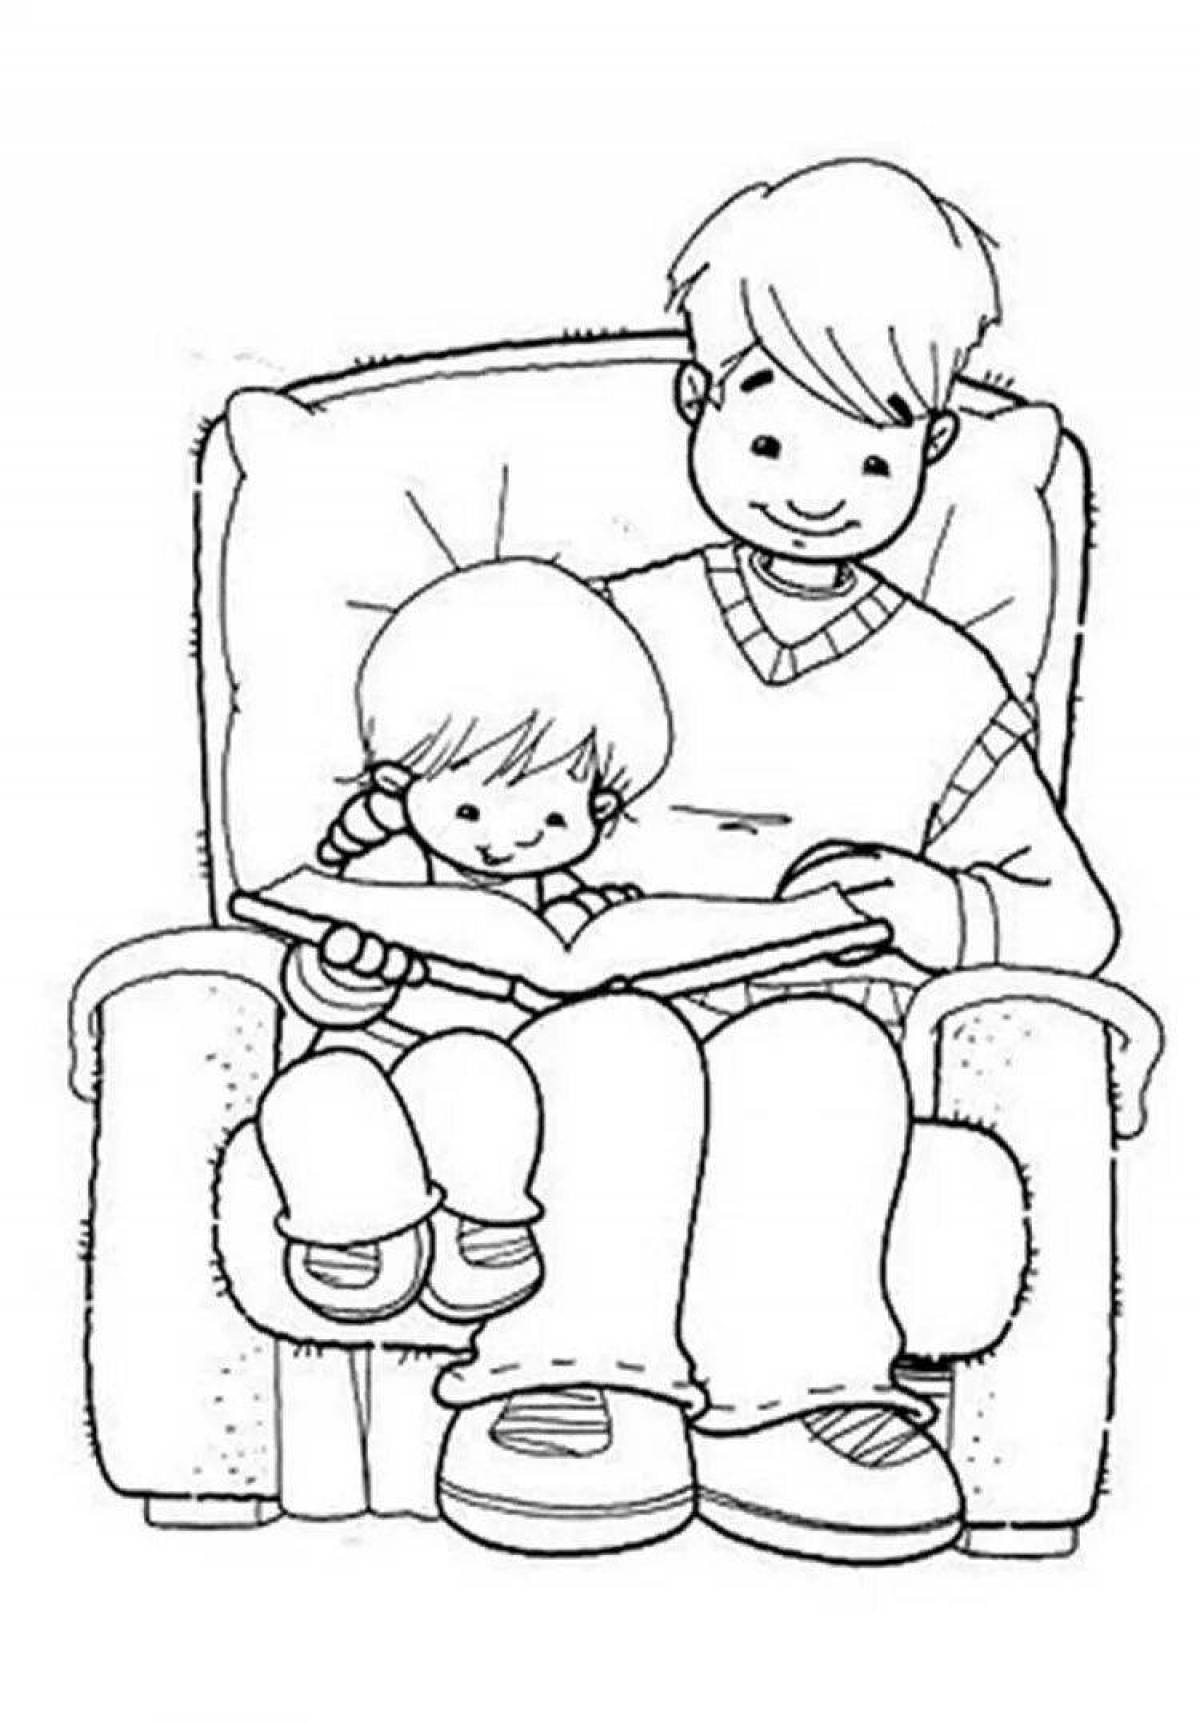 Cute dad and daughter coloring pages